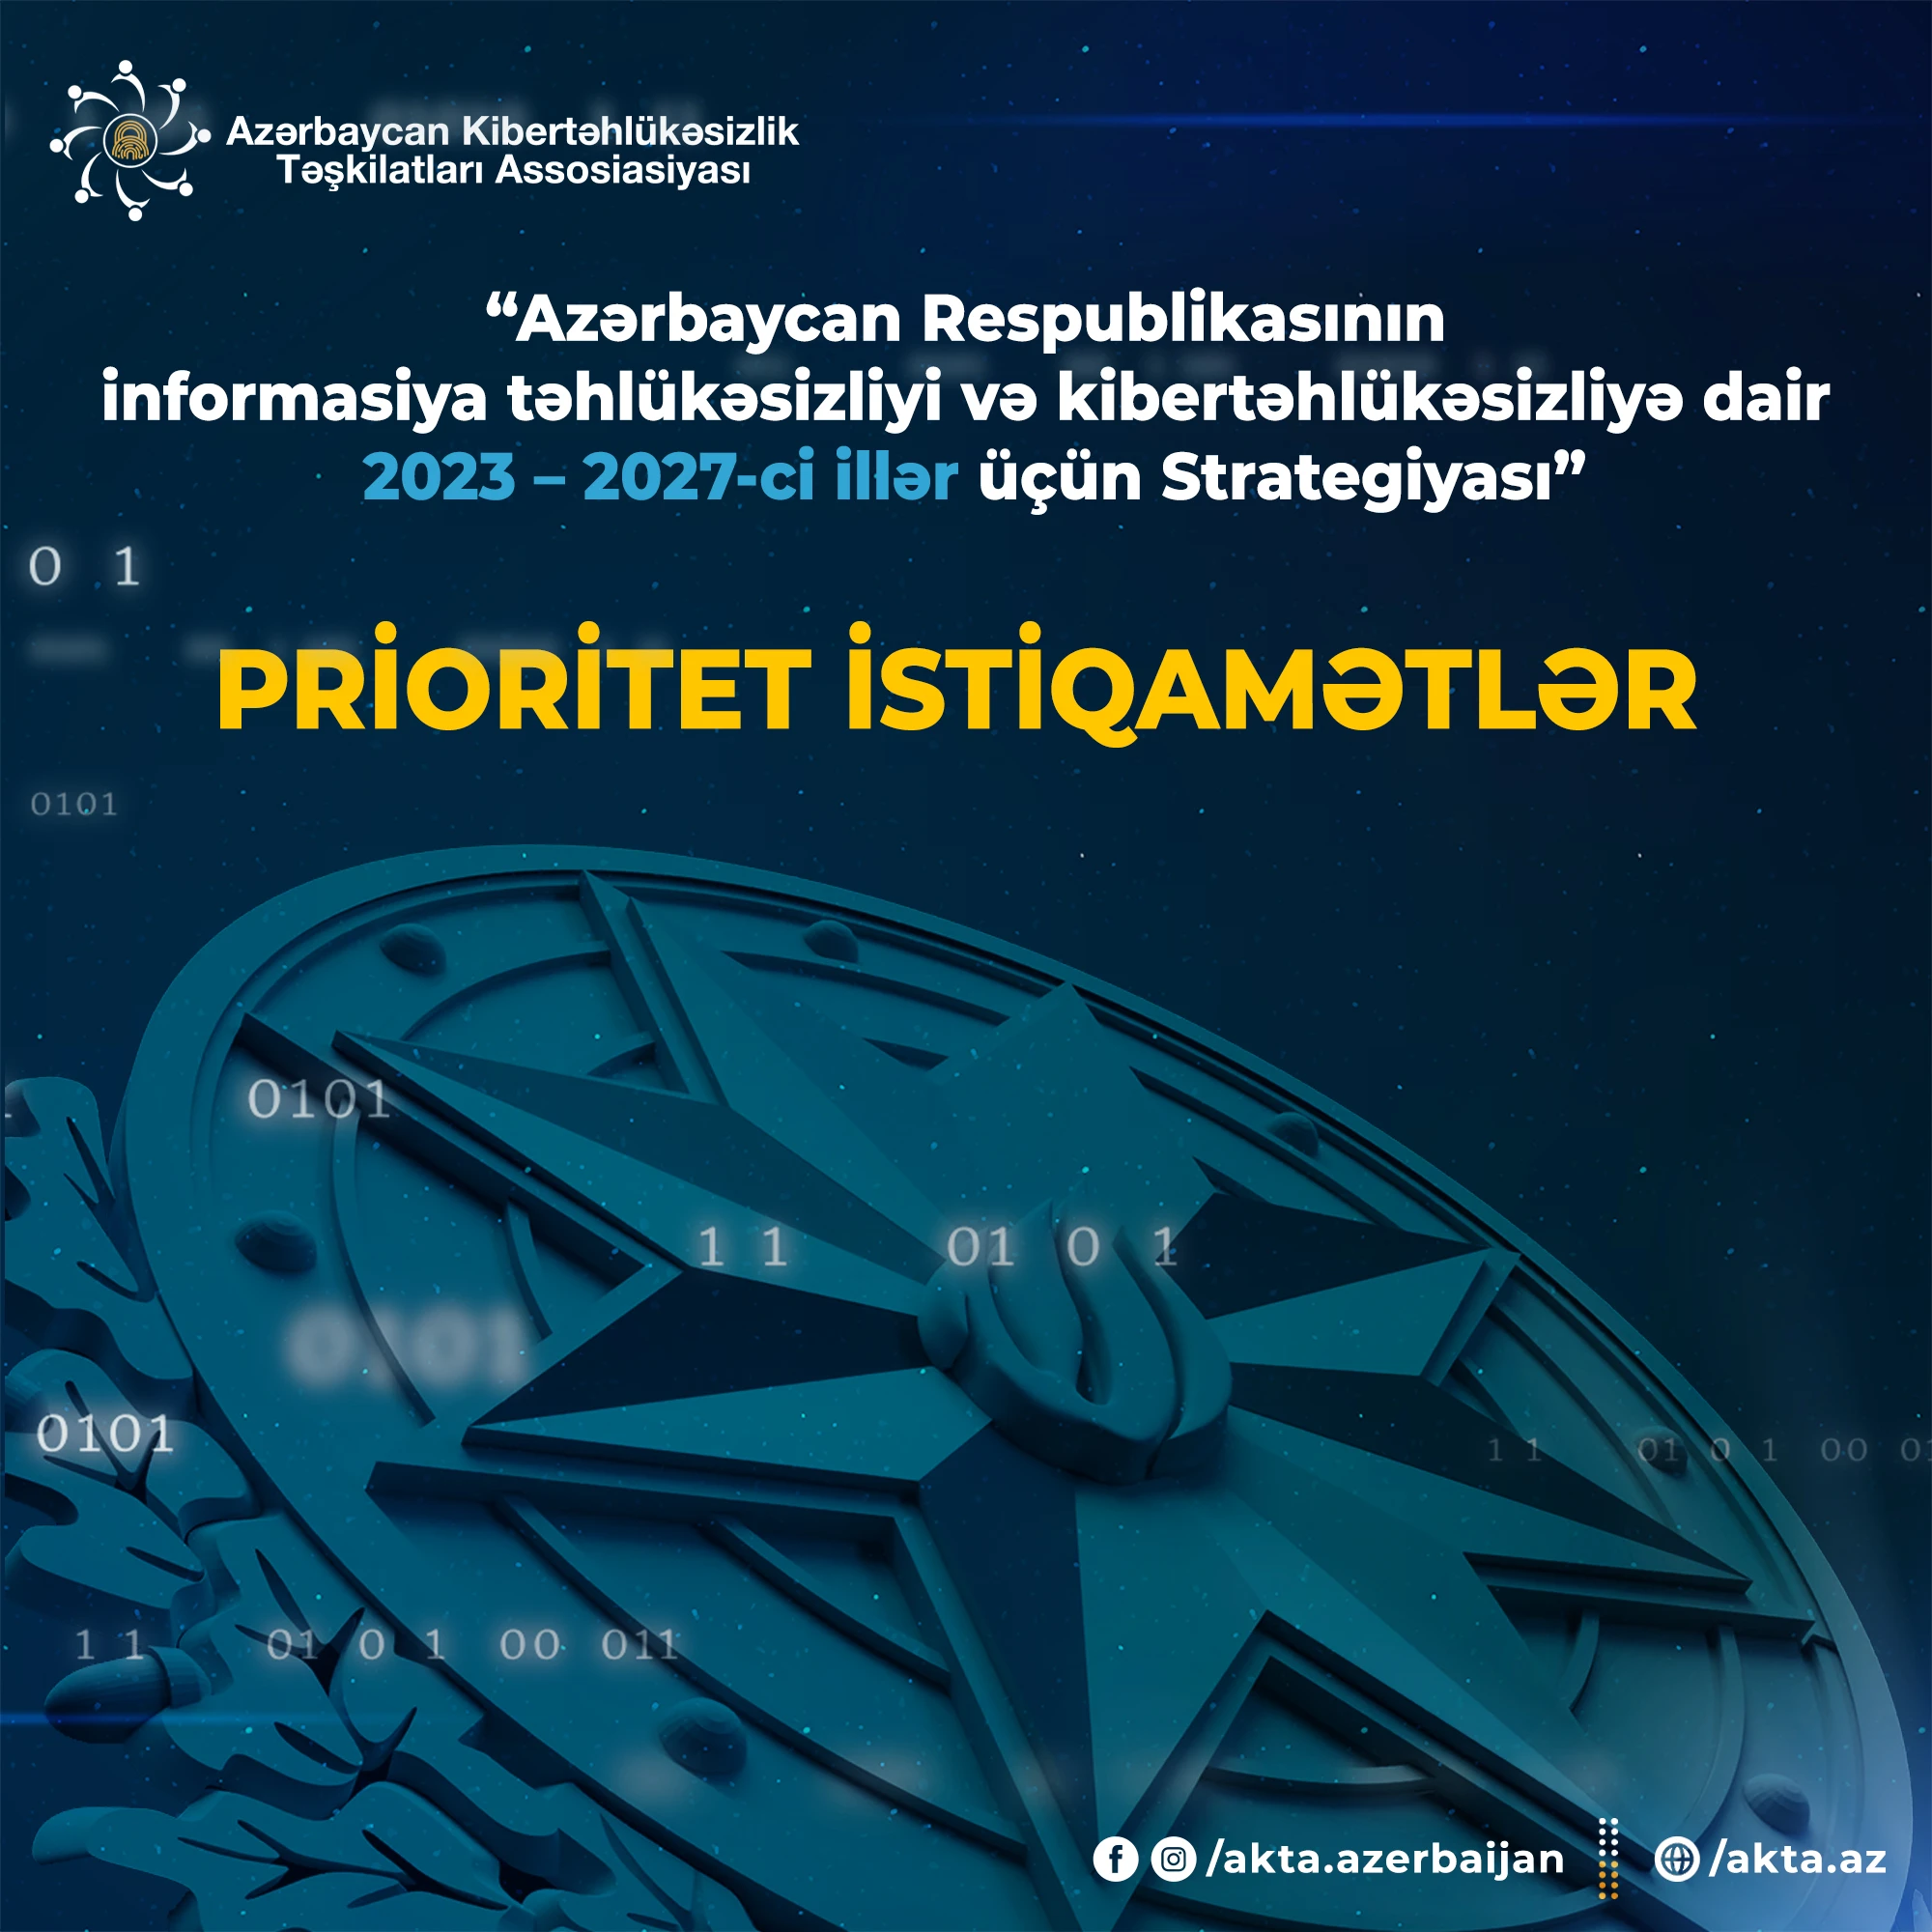 THE FIRST STRATEGY OF THE REPUBLIC OF AZERBAIJAN ON INFORMATION SECURITY AND CYBER SECURITY HAS BEEN ADOPTED